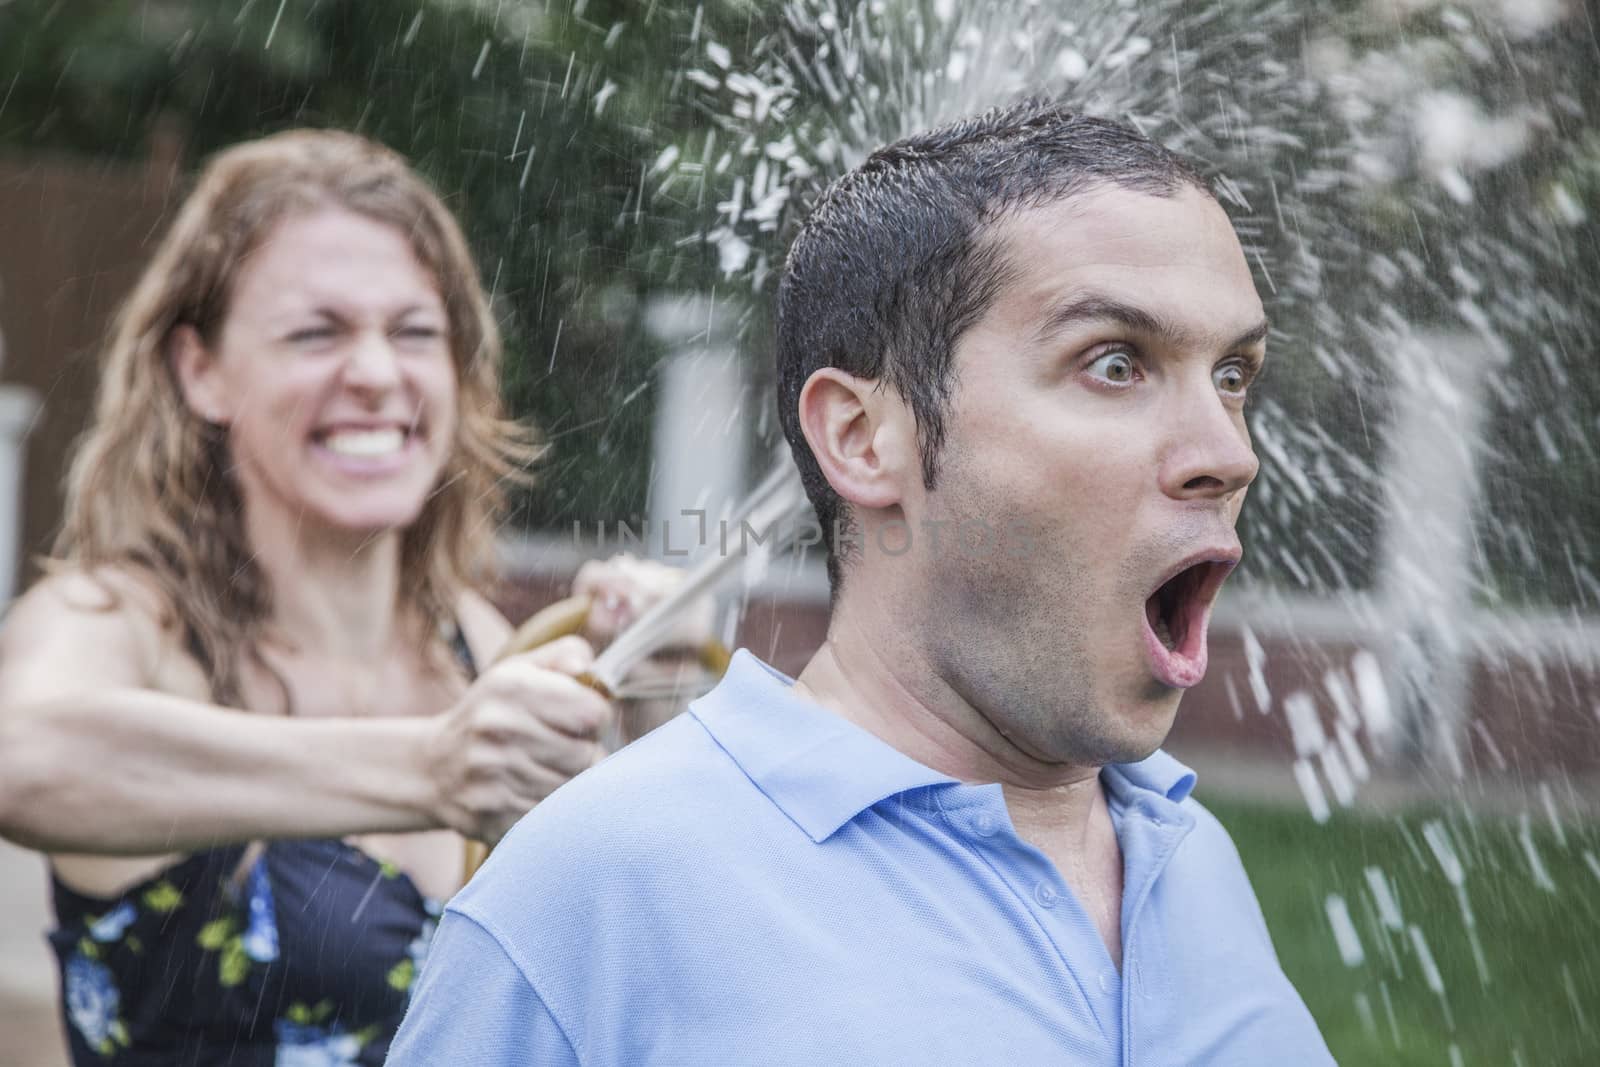 Couple playing with a garden hose and spraying each other outside in the garden, man has a shocked look, close-up 